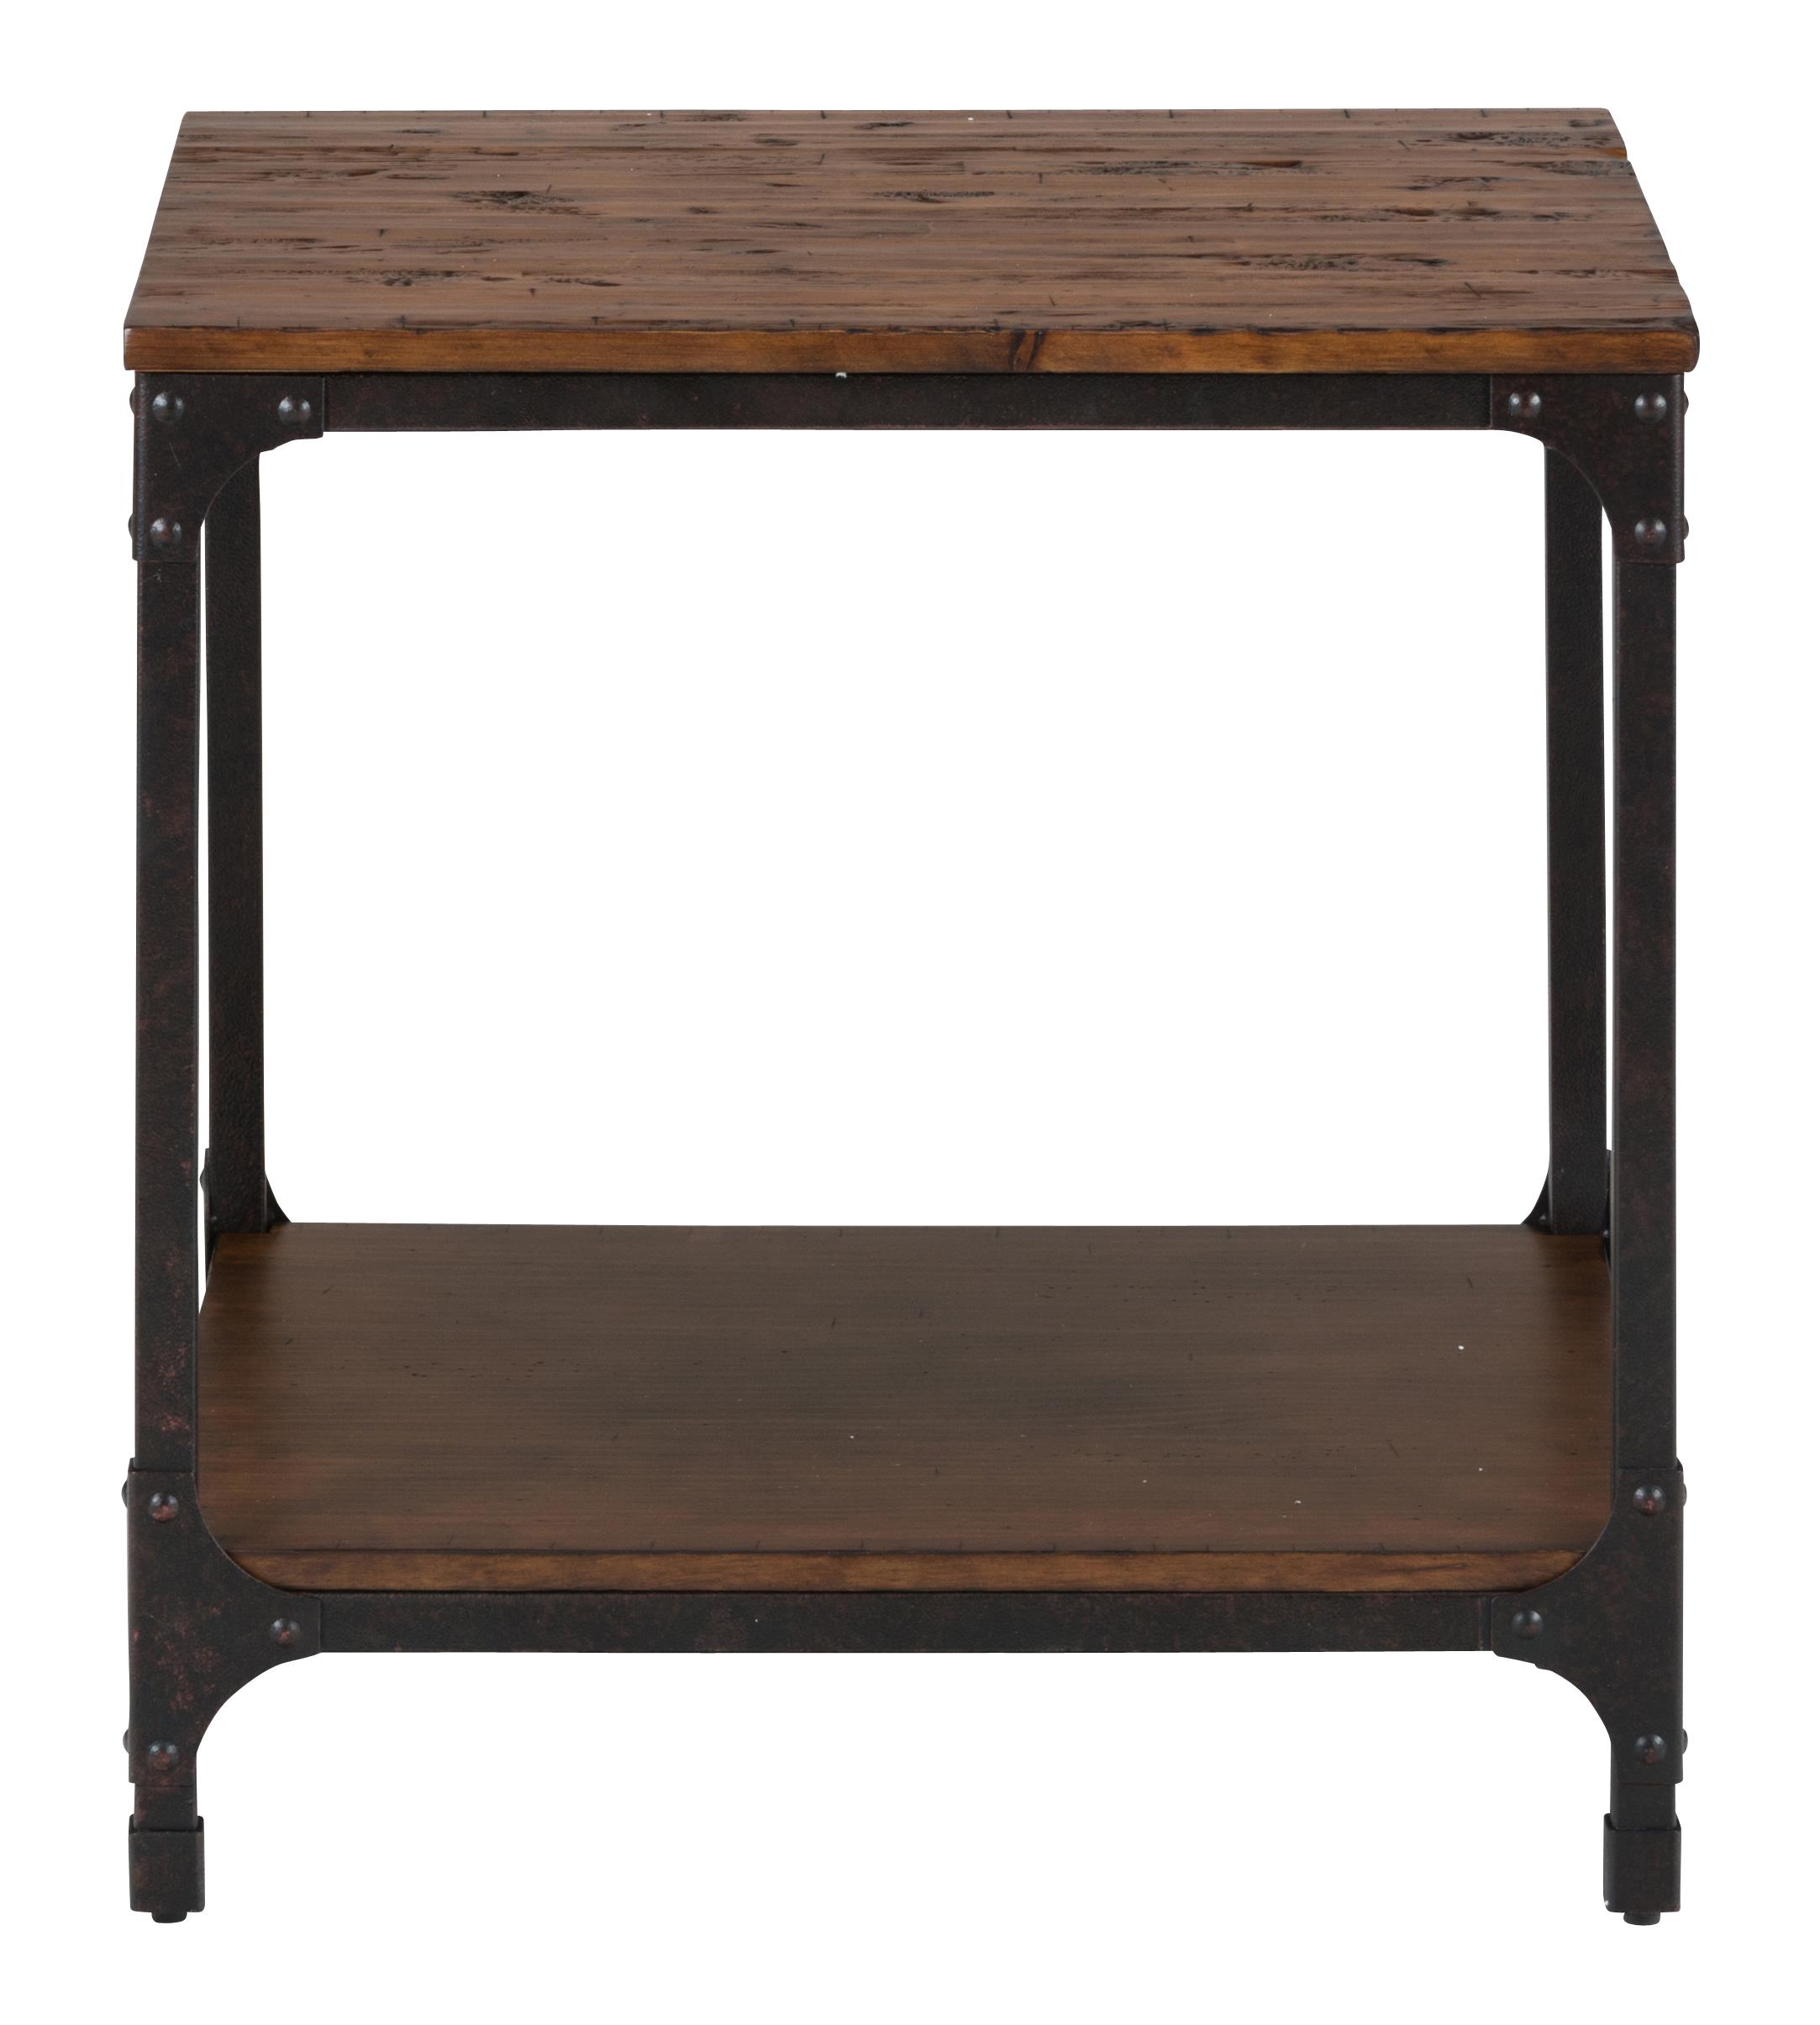 Urban Nature Square End Table-Quantity:1 - image 1 of 3